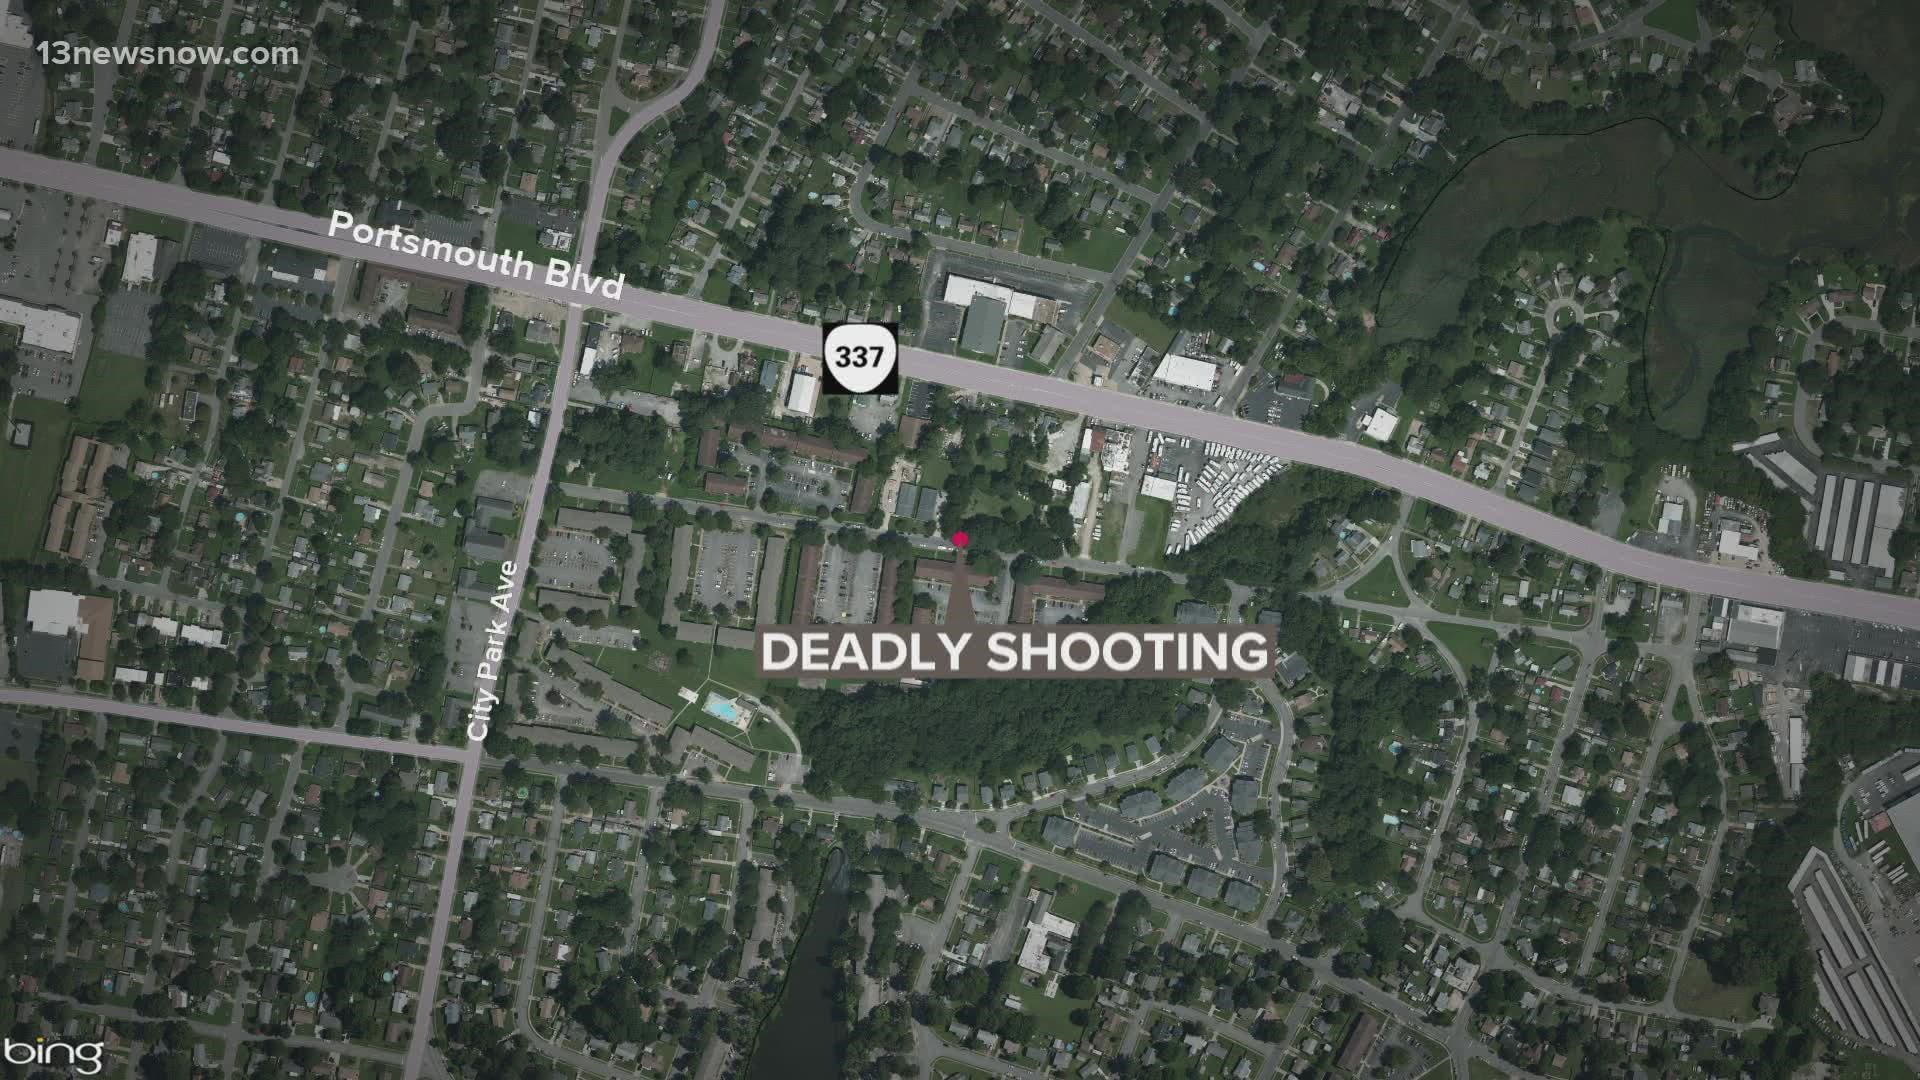 Two men were shot, one fatally, on Dunedin Road in Portsmouth Friday.